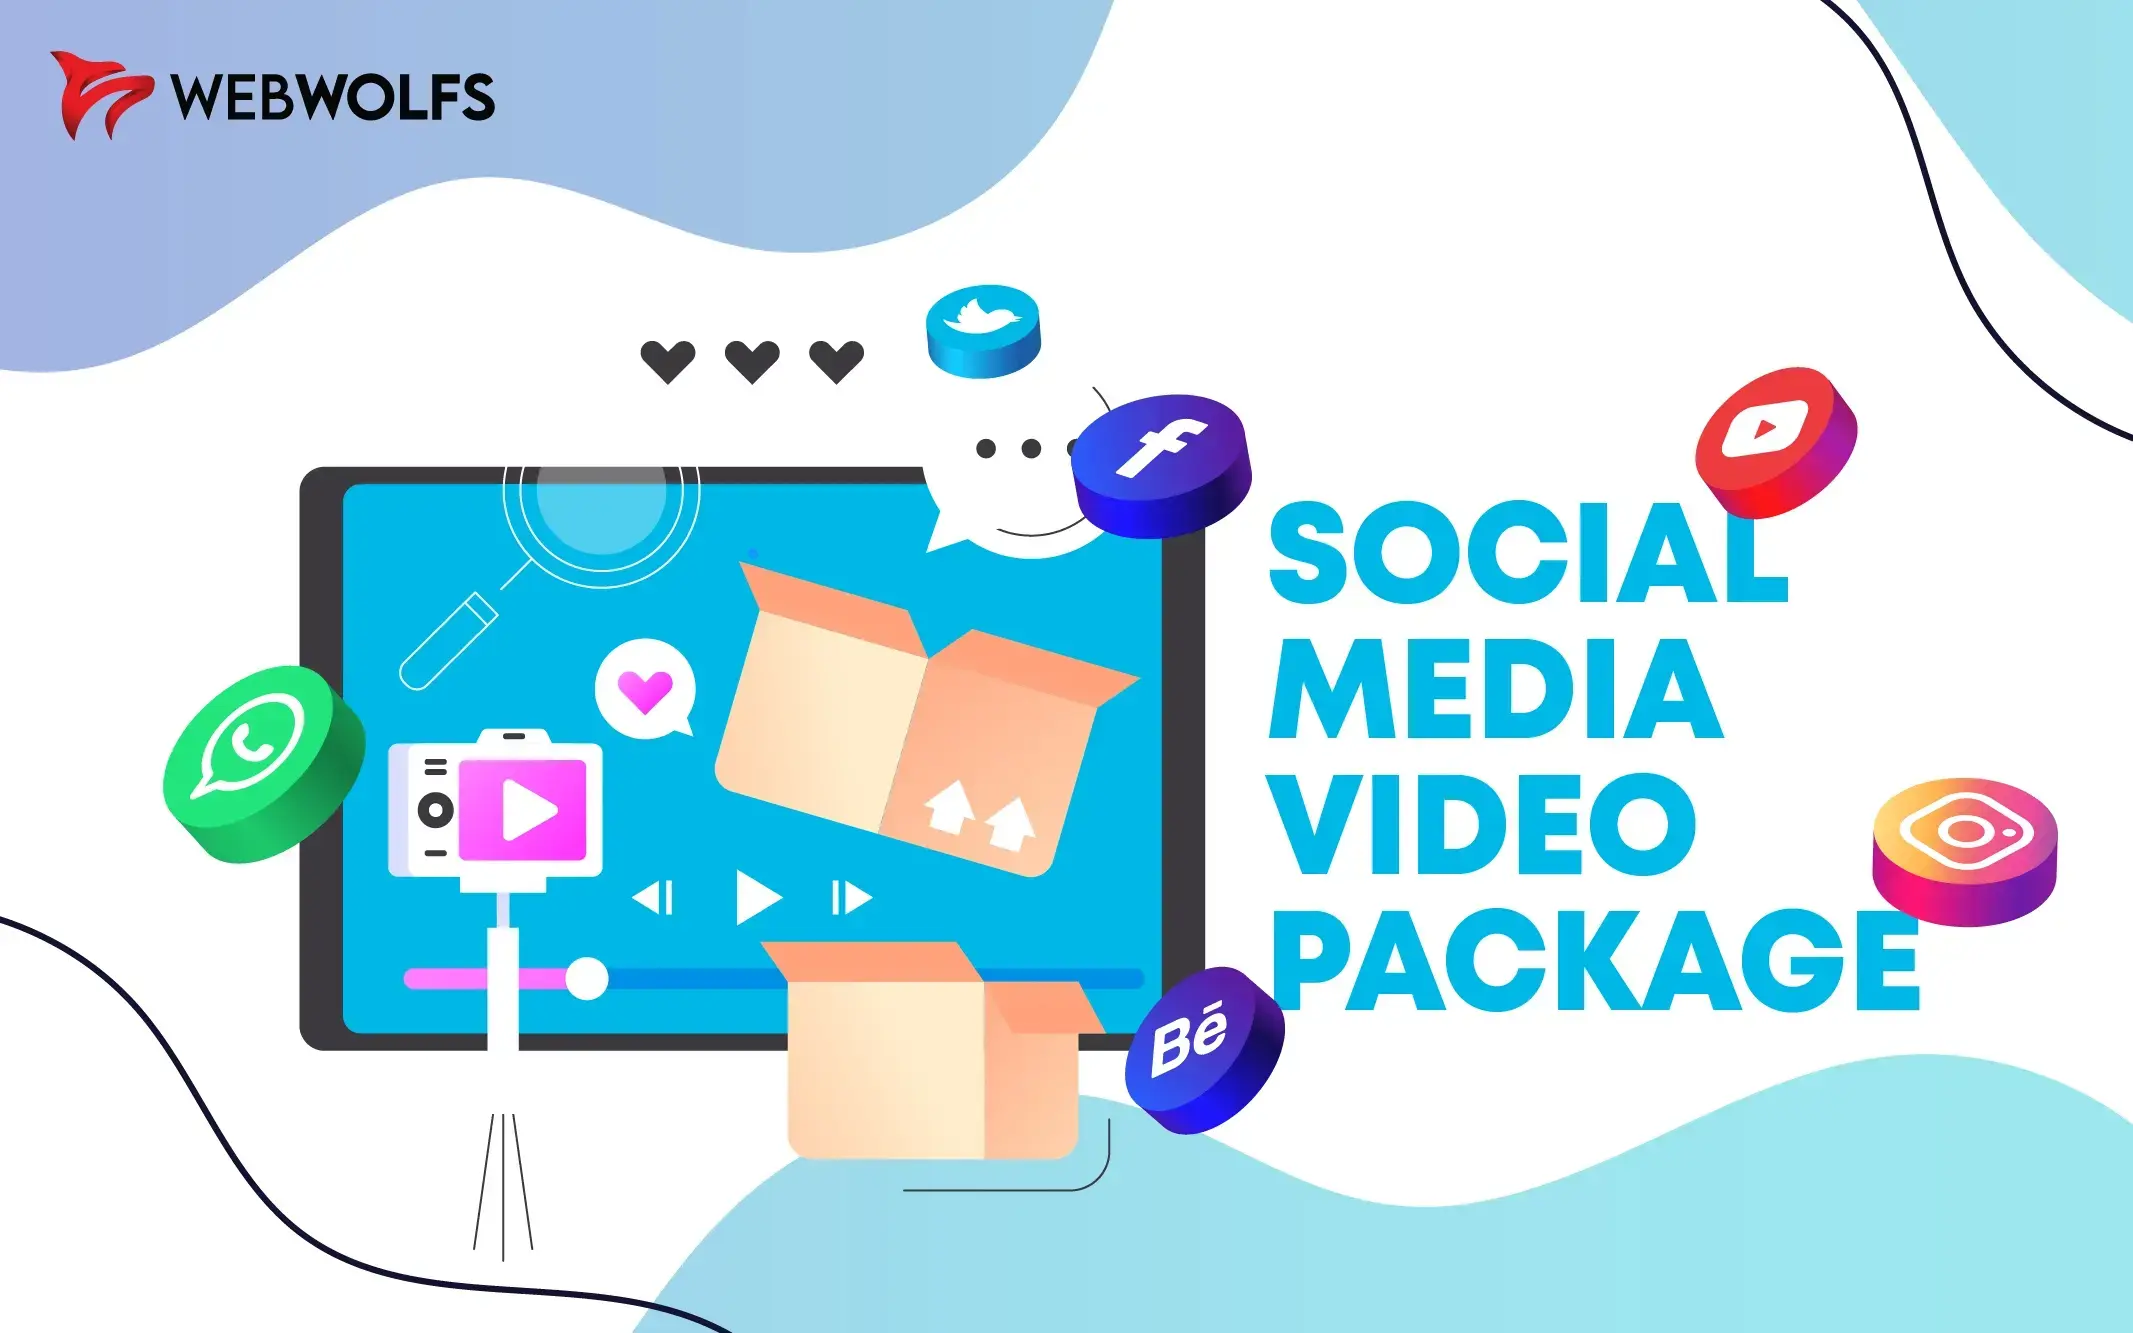 DIY vs. Professional: Deciding on the Right Social Media Video Package Approach